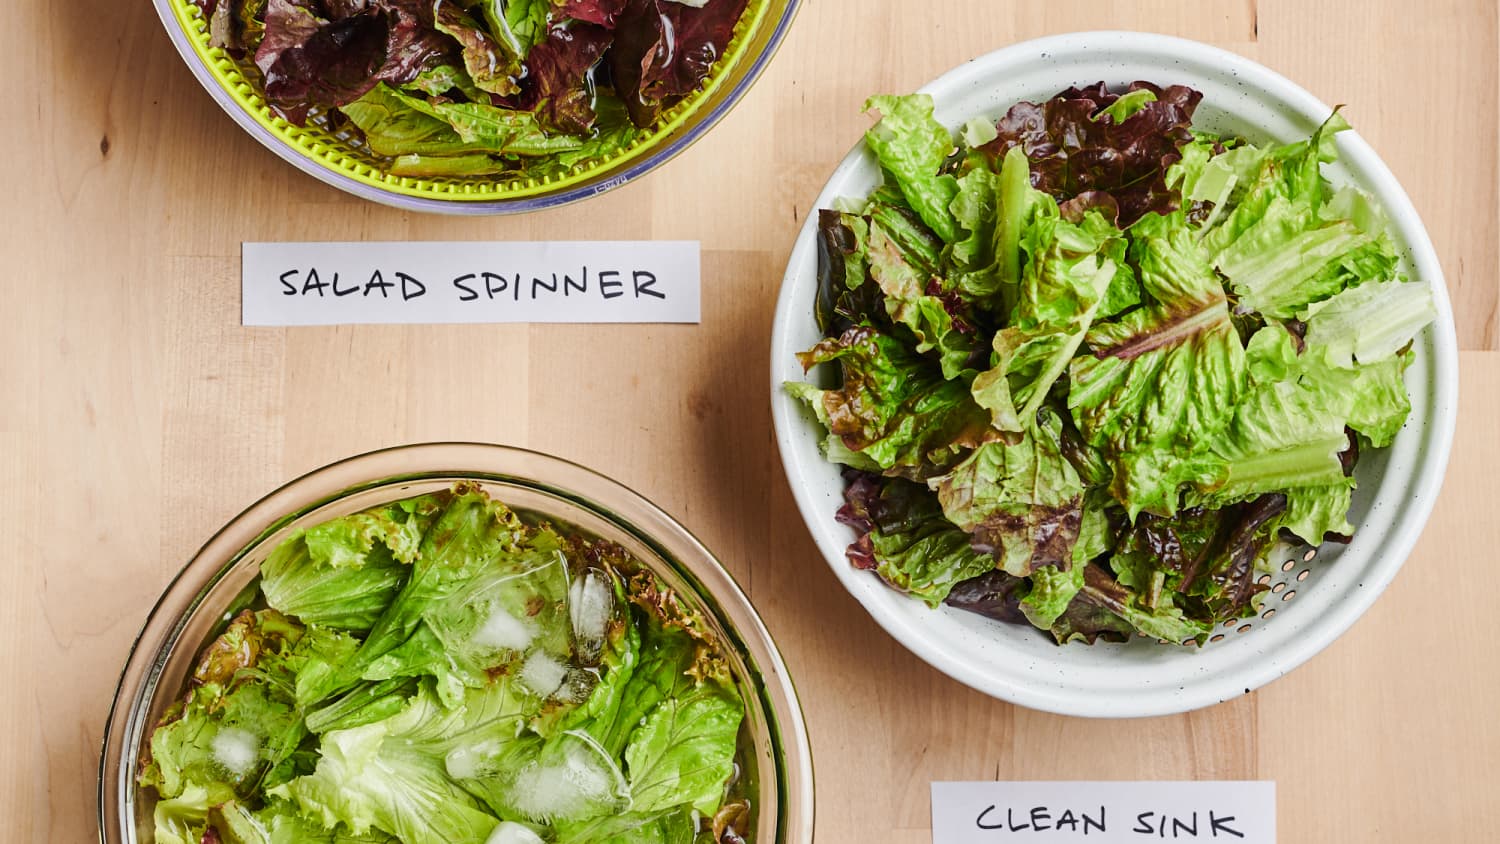 The Best Method for Washing and Drying Salad Greens